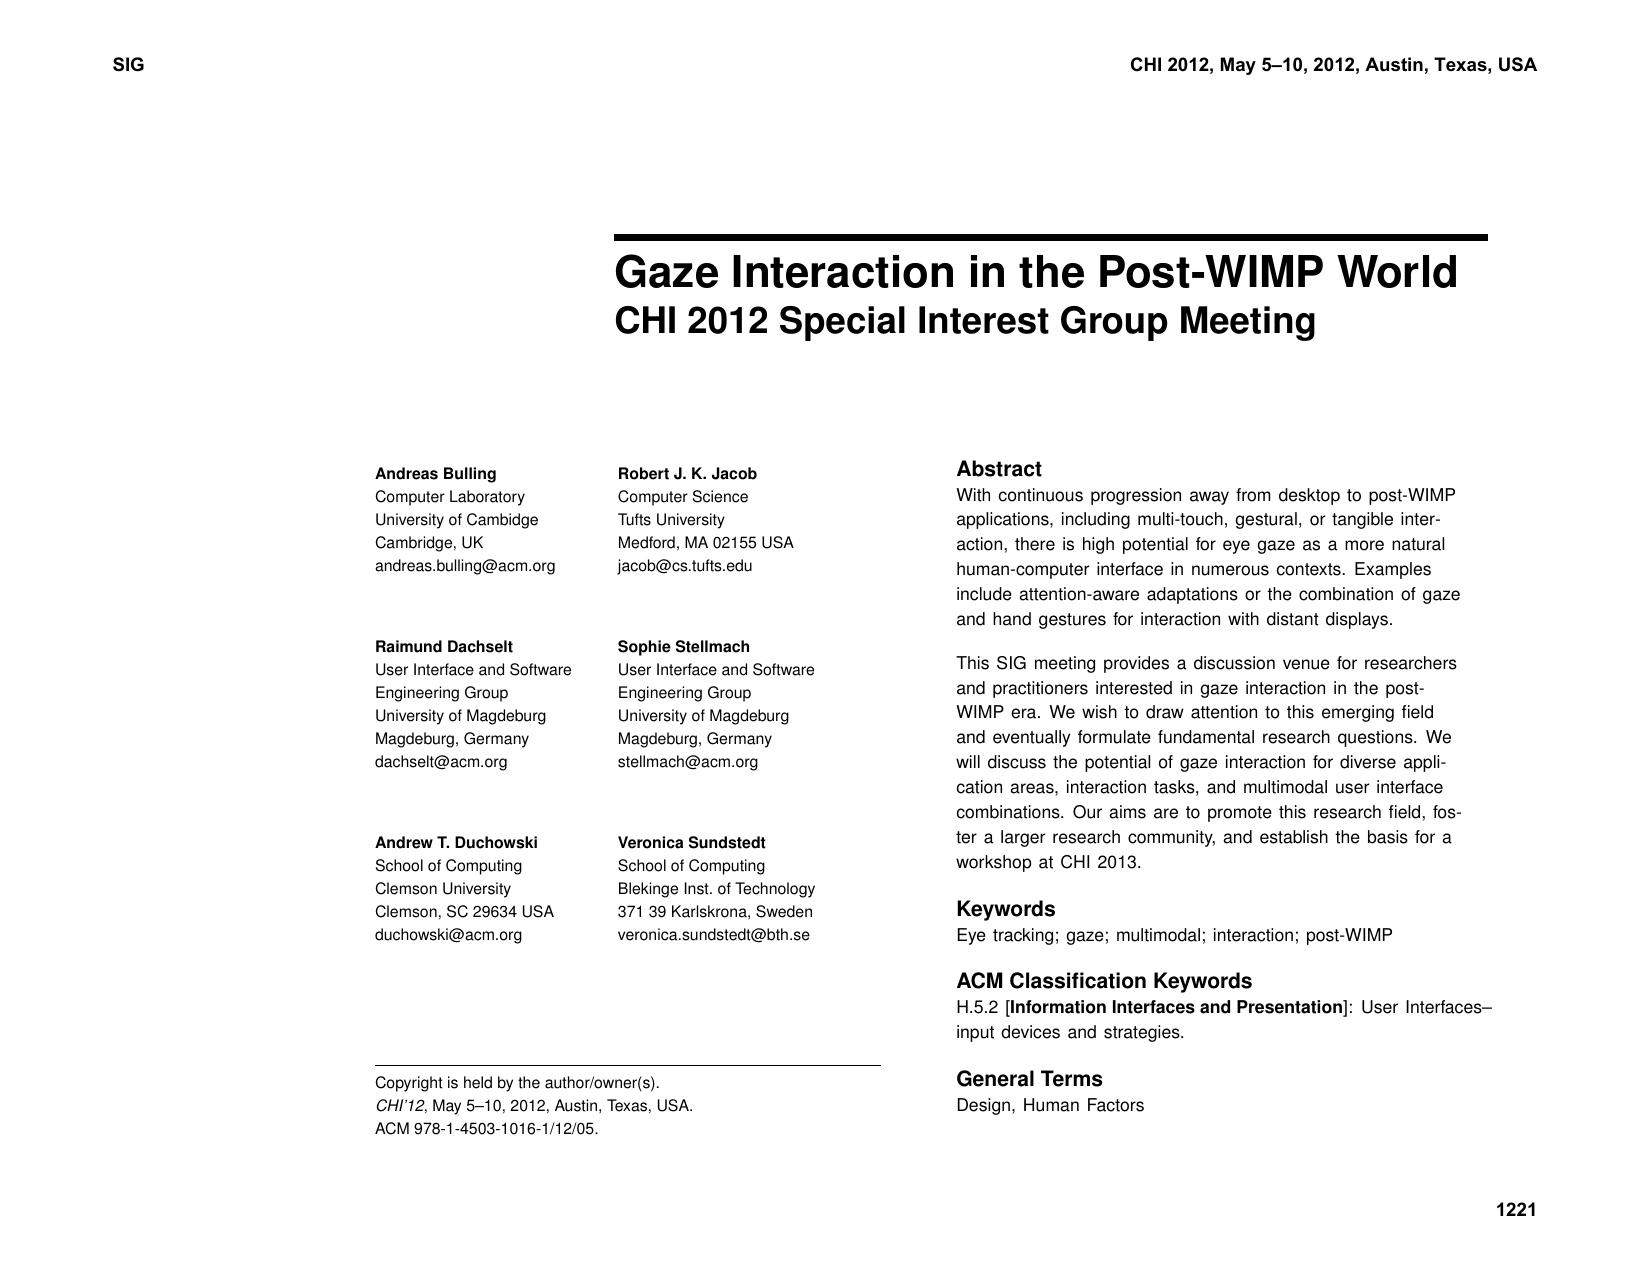 Gaze interaction in the post-WIMP world